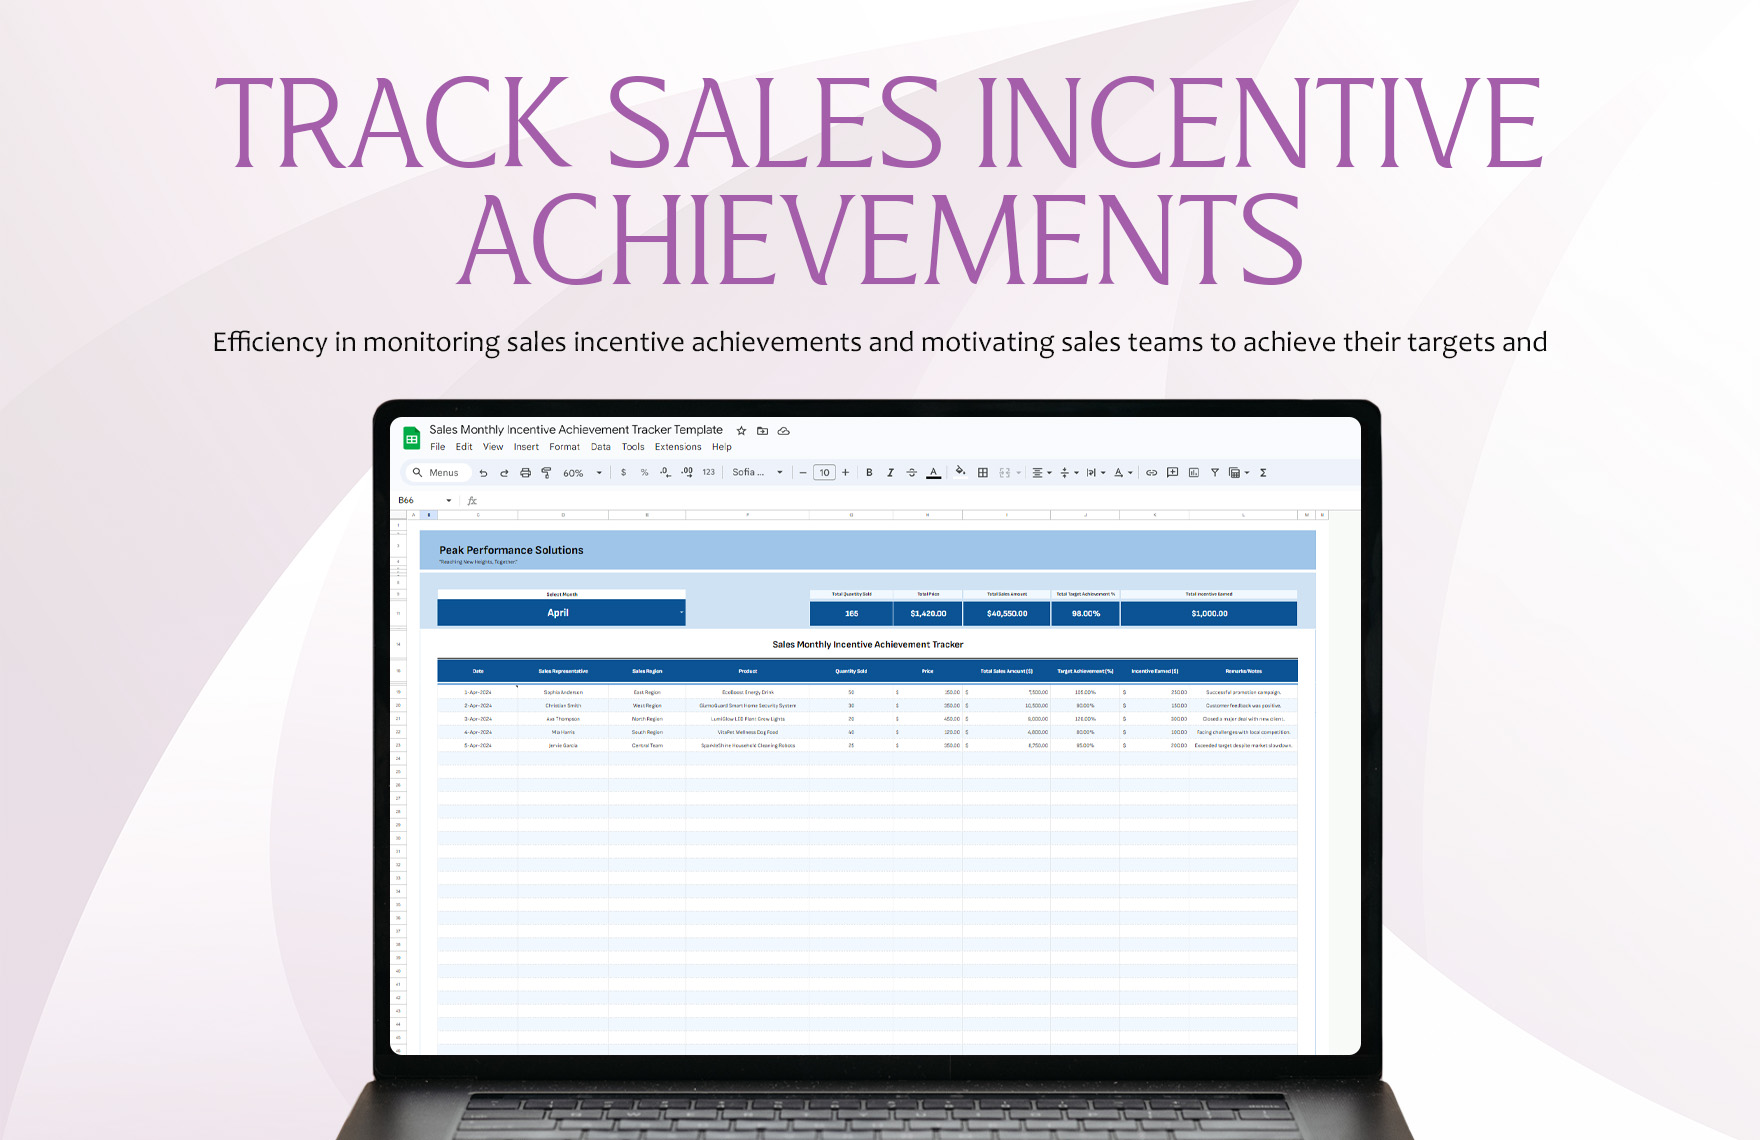 Sales Monthly Incentive Achievement Tracker Template